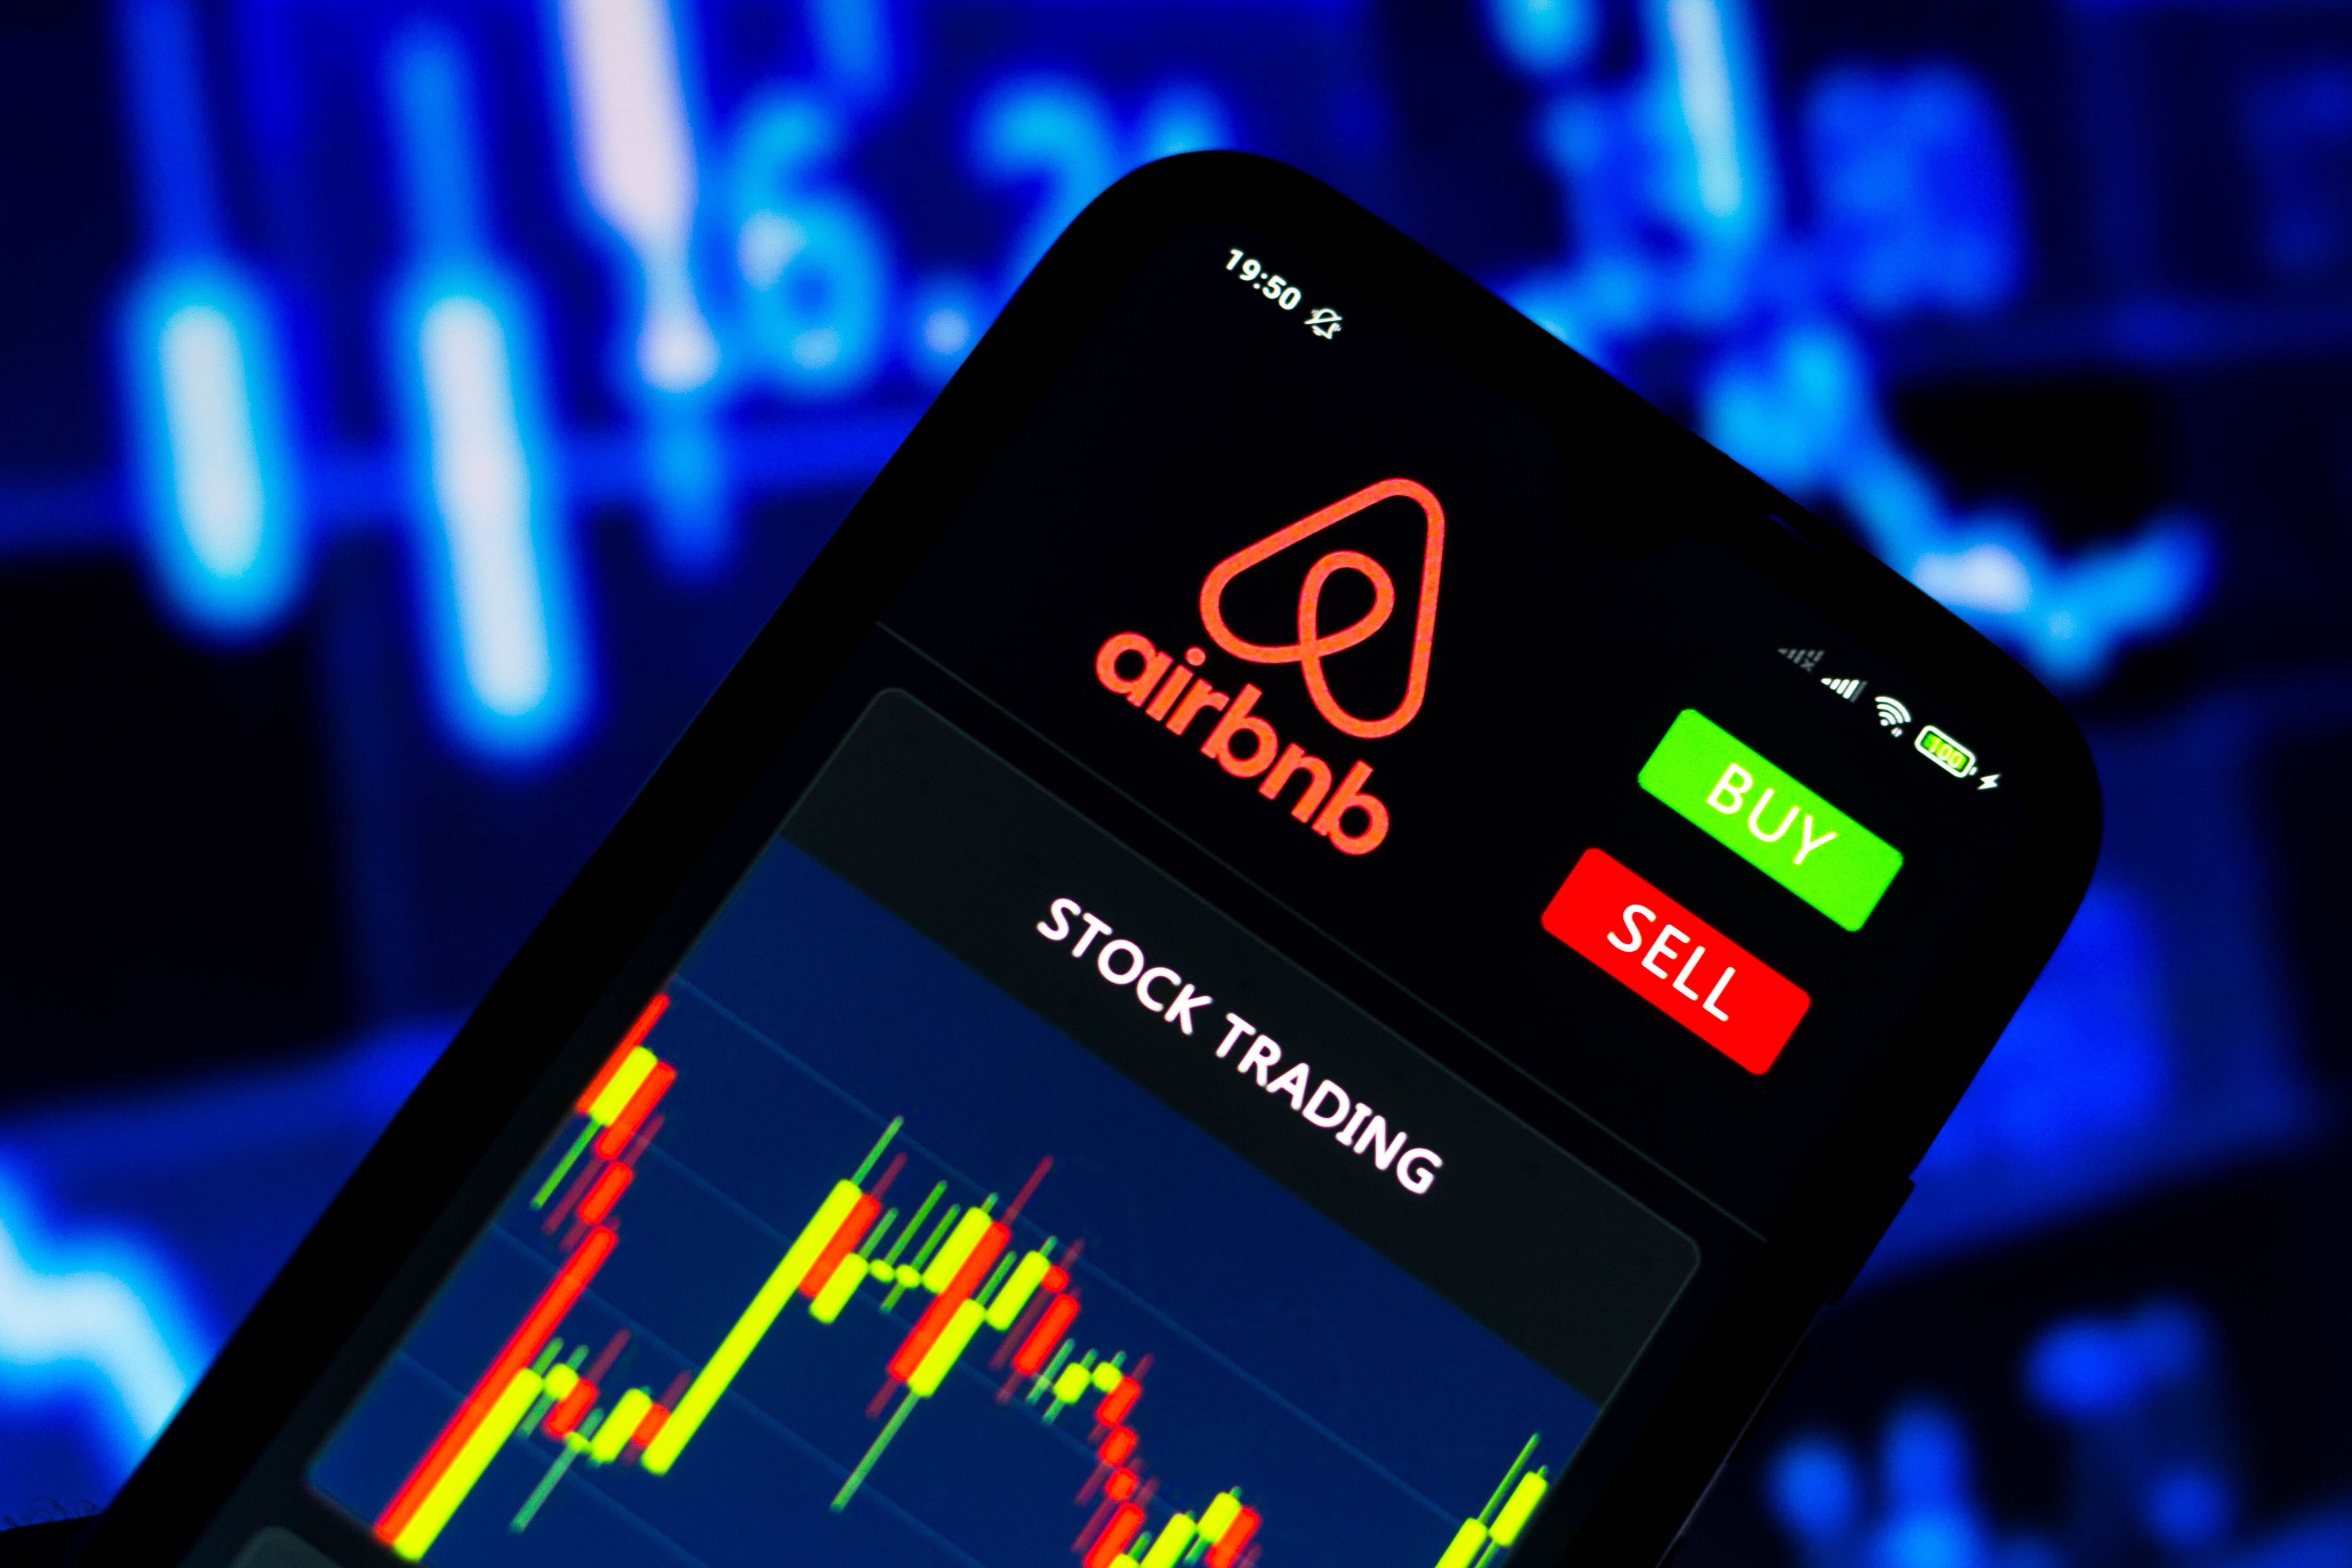 Jim Cramer says Airbnb’s recent weakness is a buying opportunity